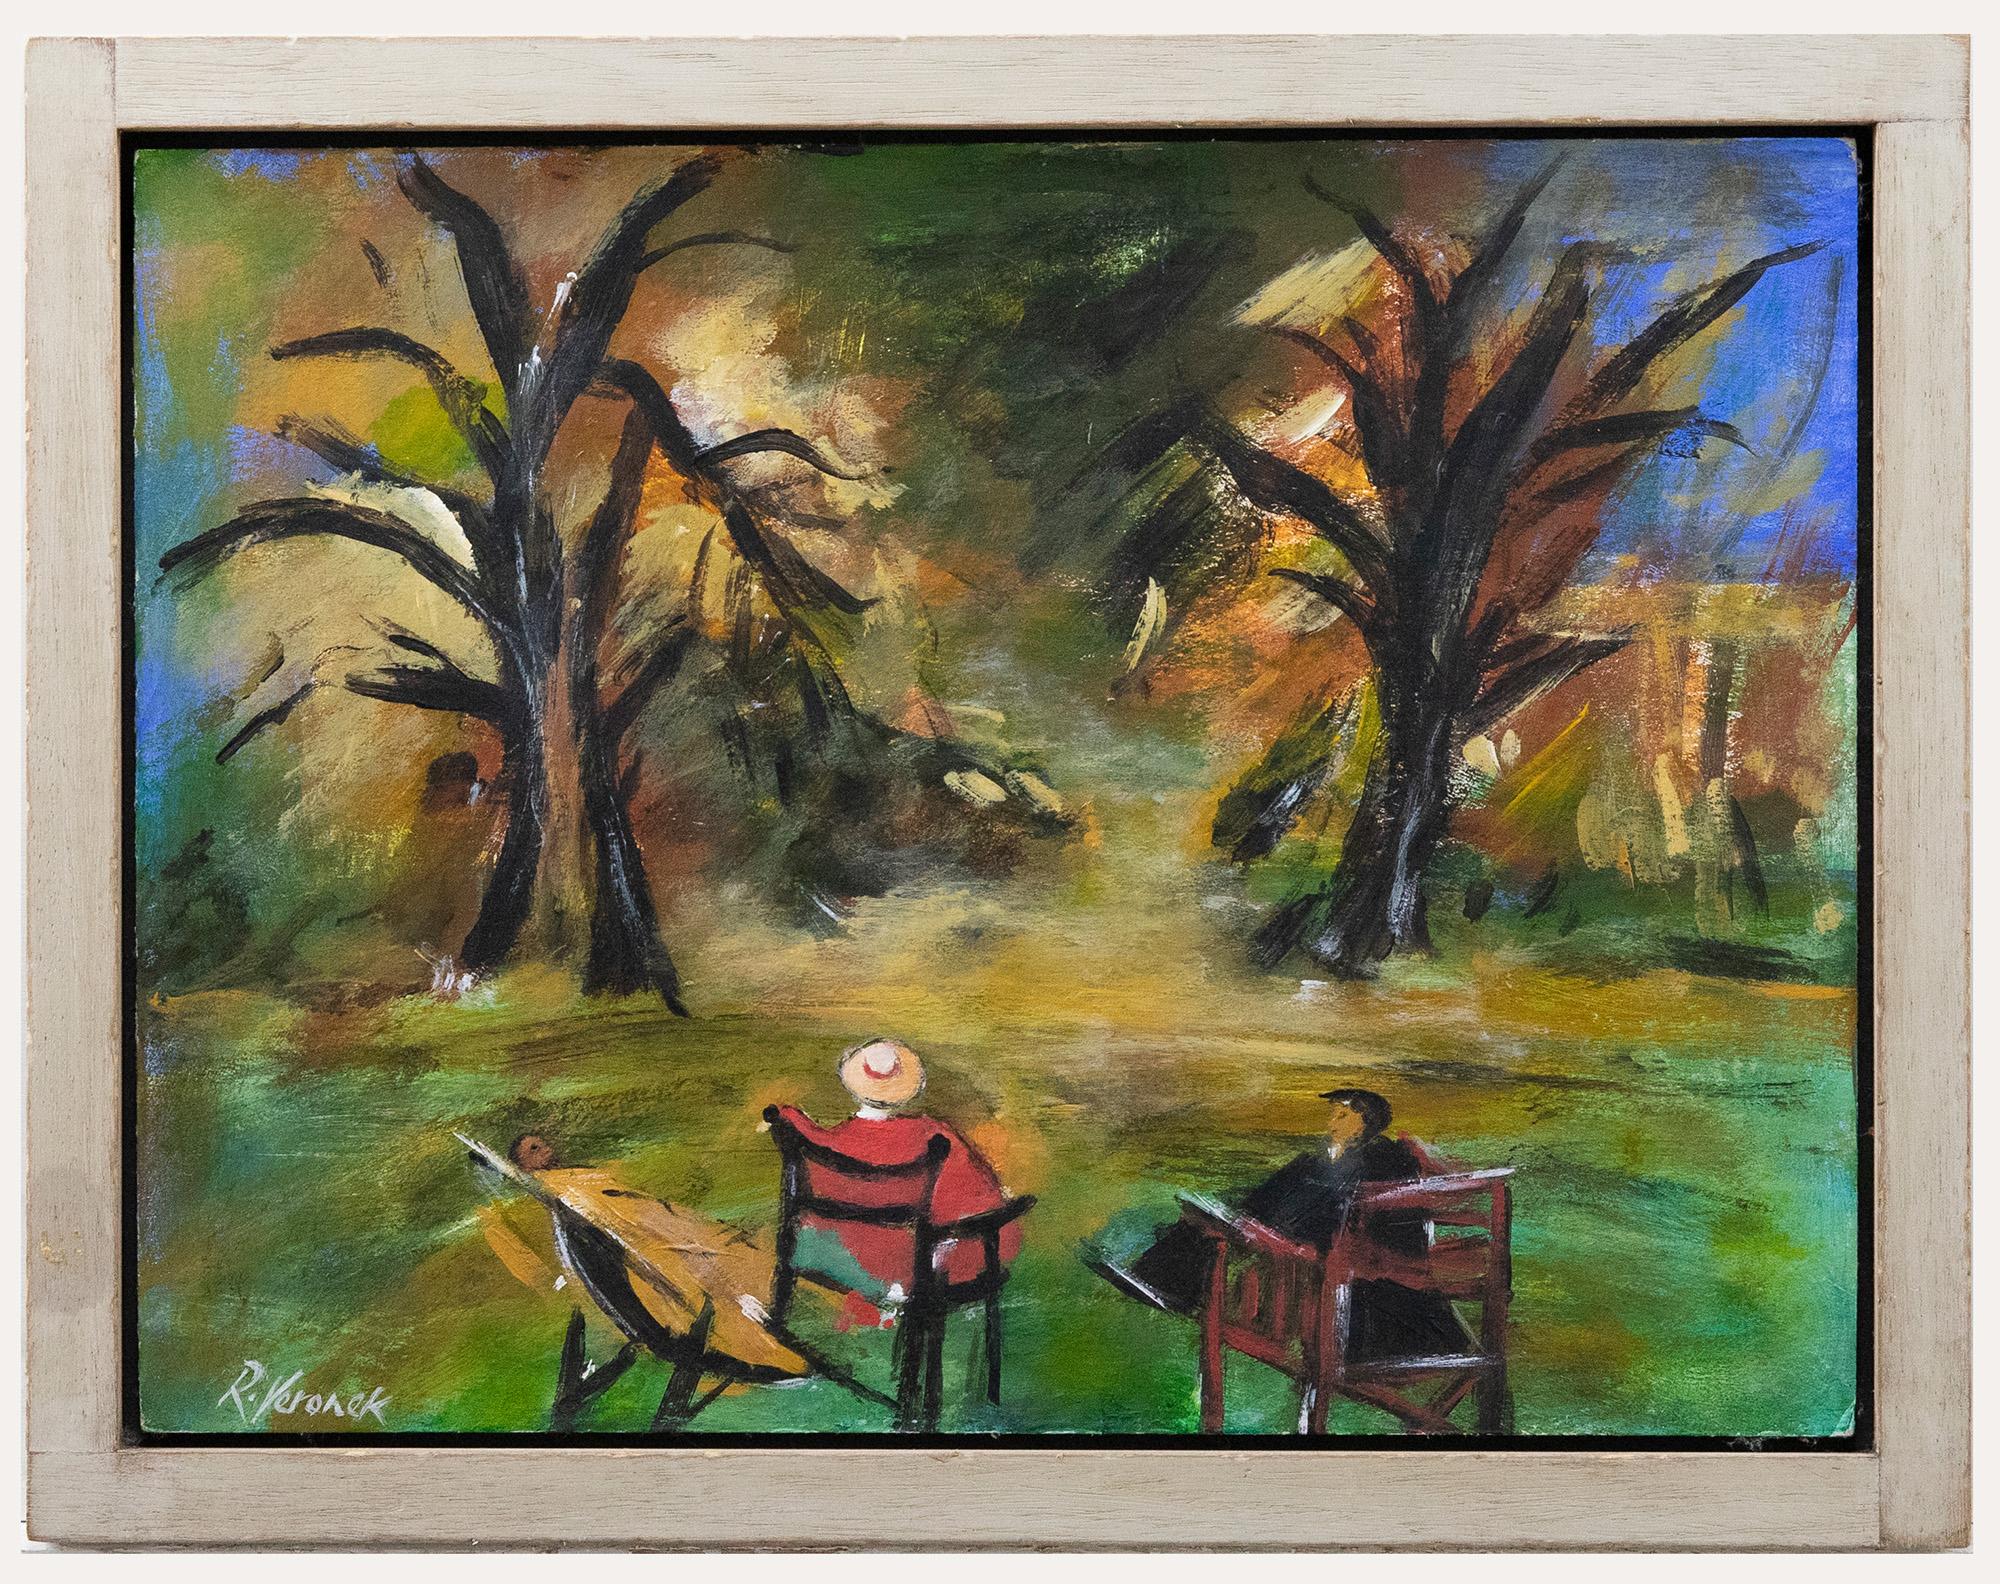 Unknown Landscape Painting - Robert Veronek - Framed Contemporary Oil, Relaxing by the Beech Trees